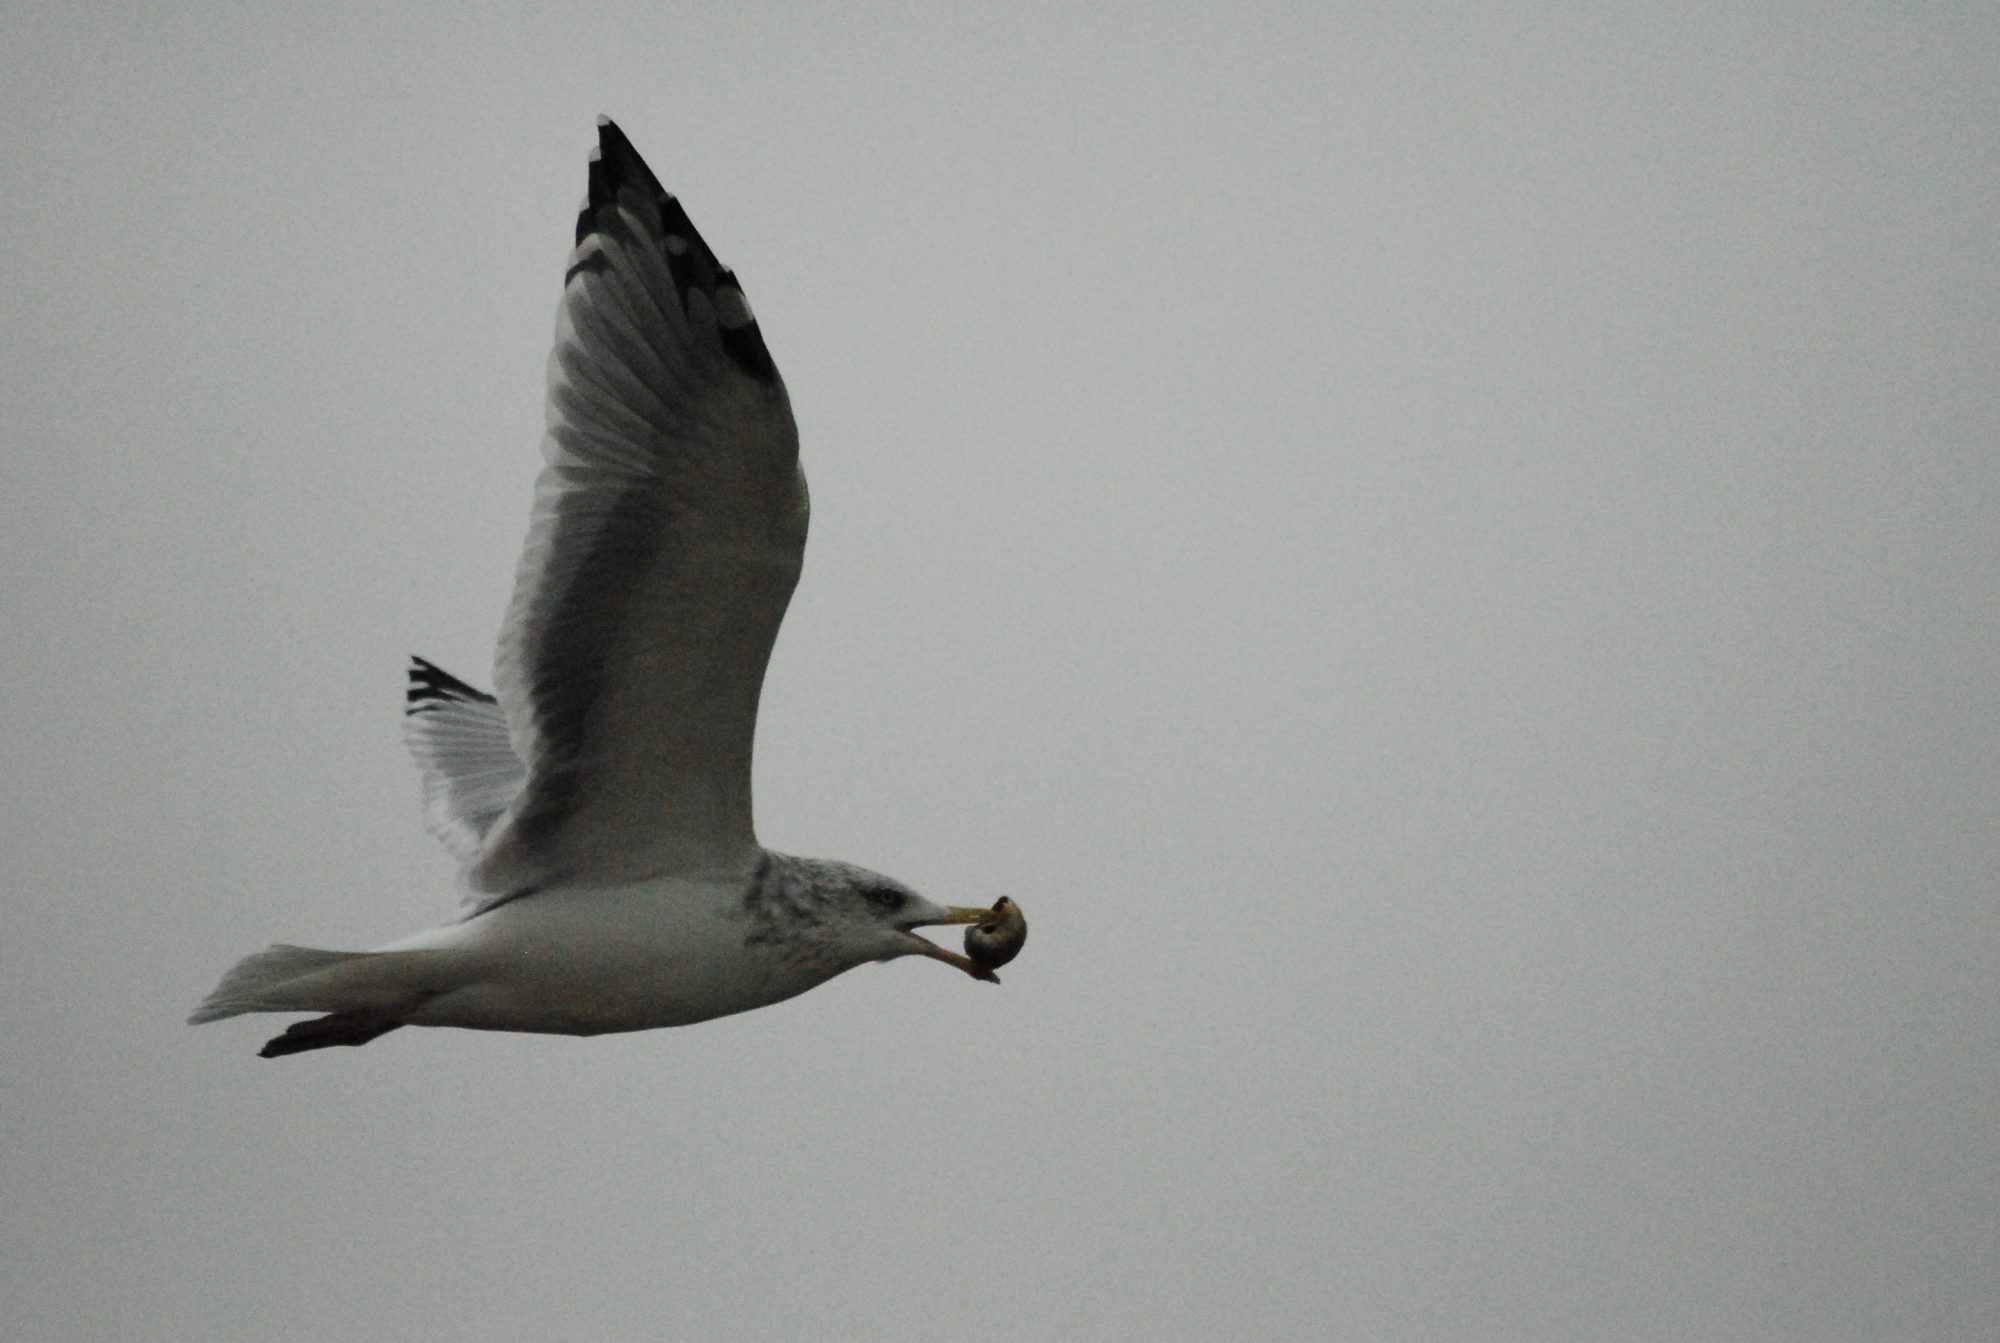 Seagull and Snail, Cape Cod, 2008